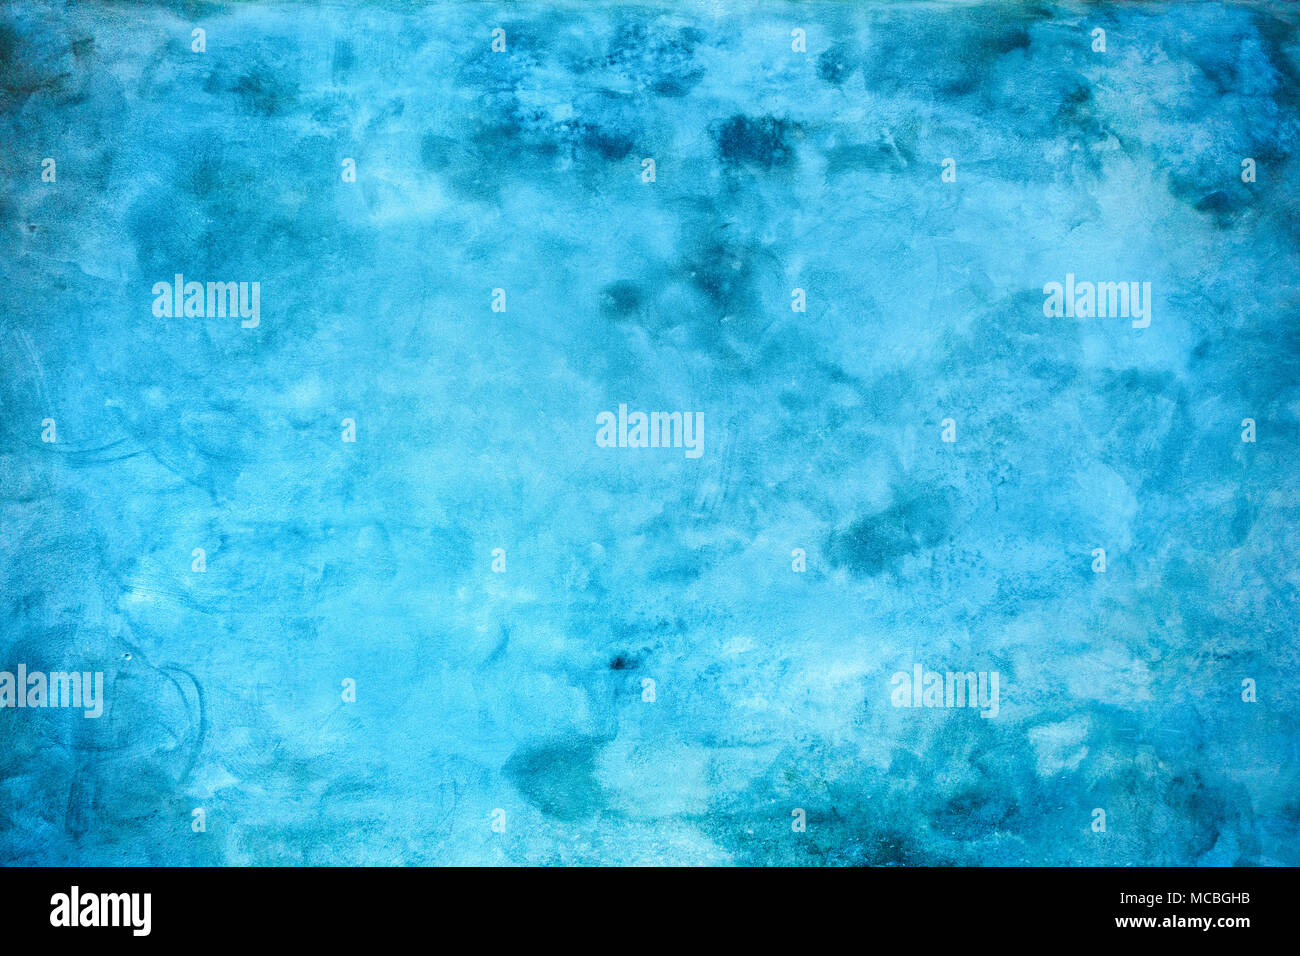 Grungy blue concrete wall texture background. Stock Photo